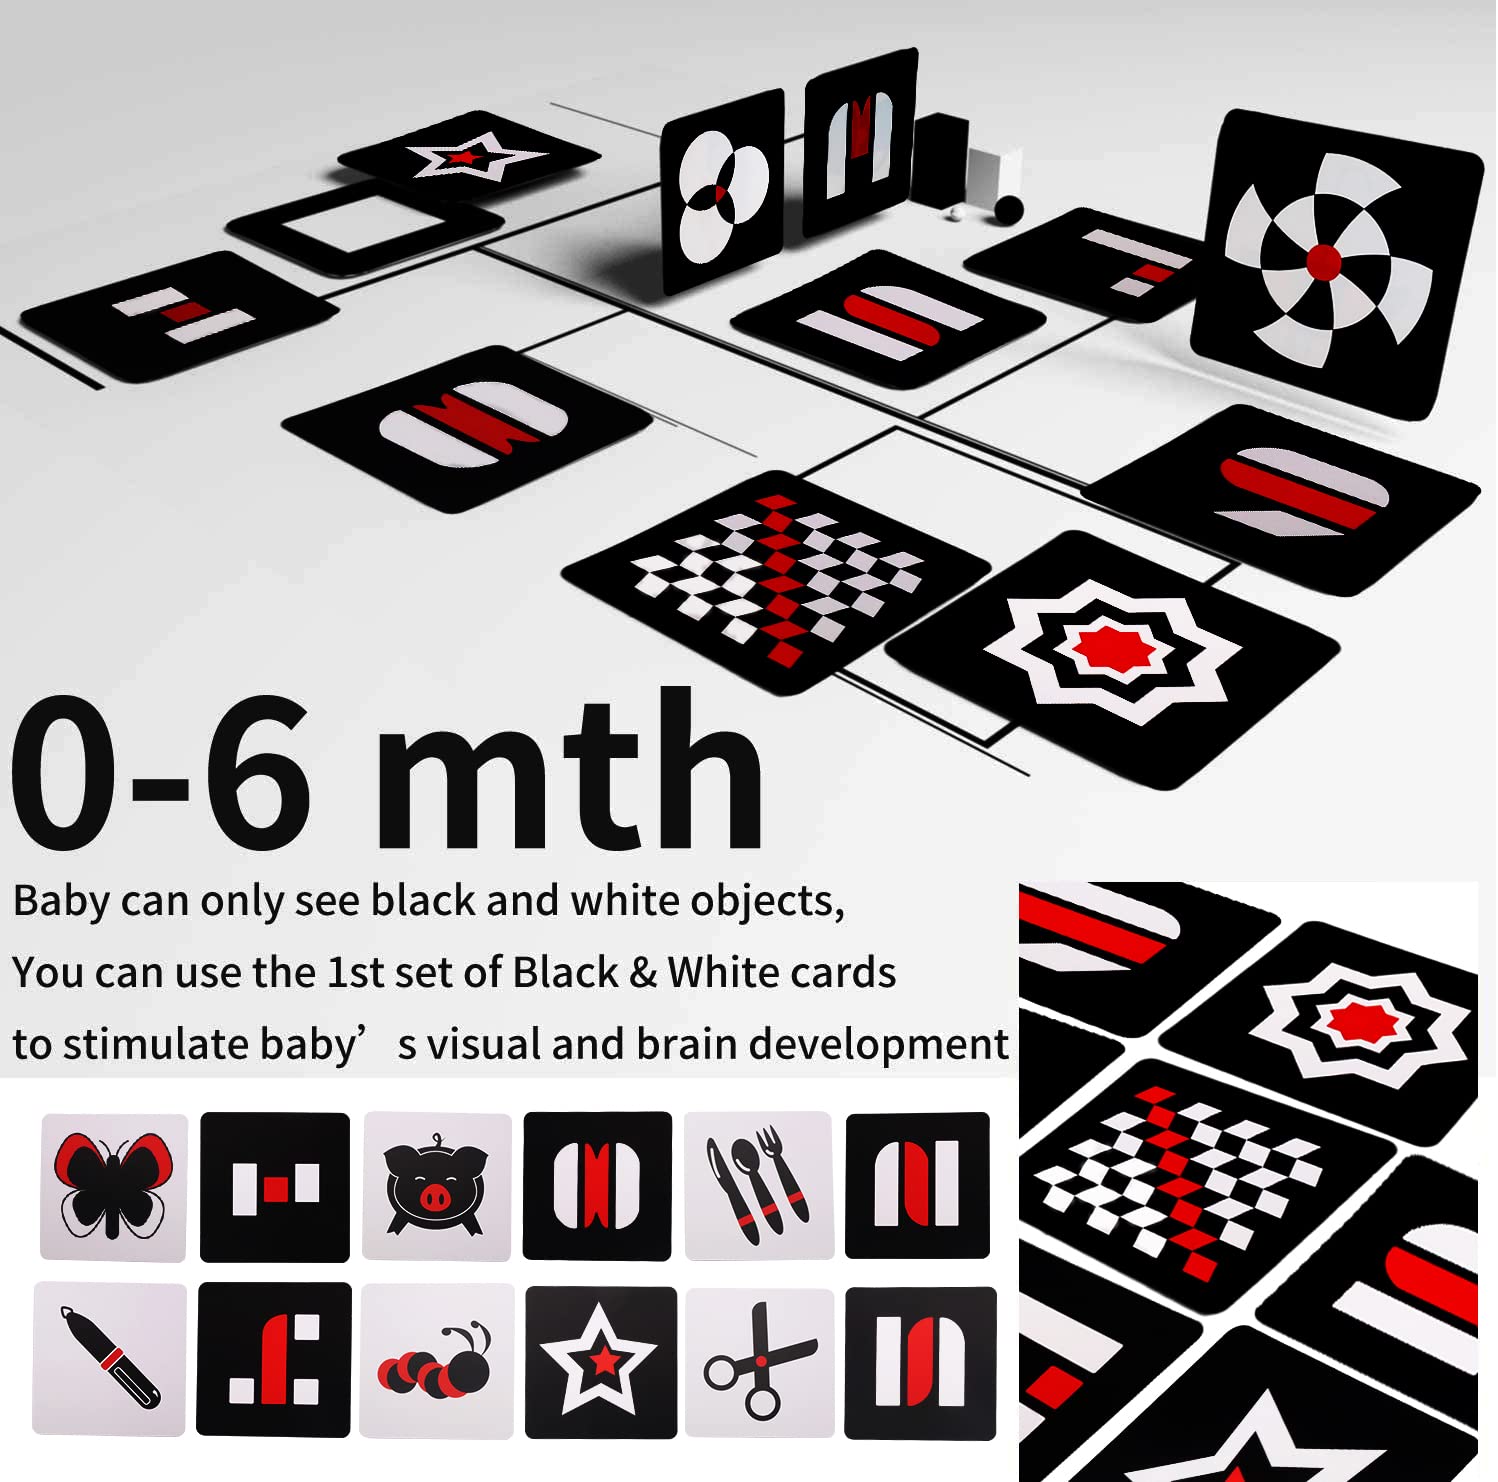 SNOWIE SOFT® Black RedFlash Cards for Infants, 16 Pictures 5.5 x 5.5 Inch Designed Contrast Cards for Newborn Baby Toys with High Contrast (3-6 Months)